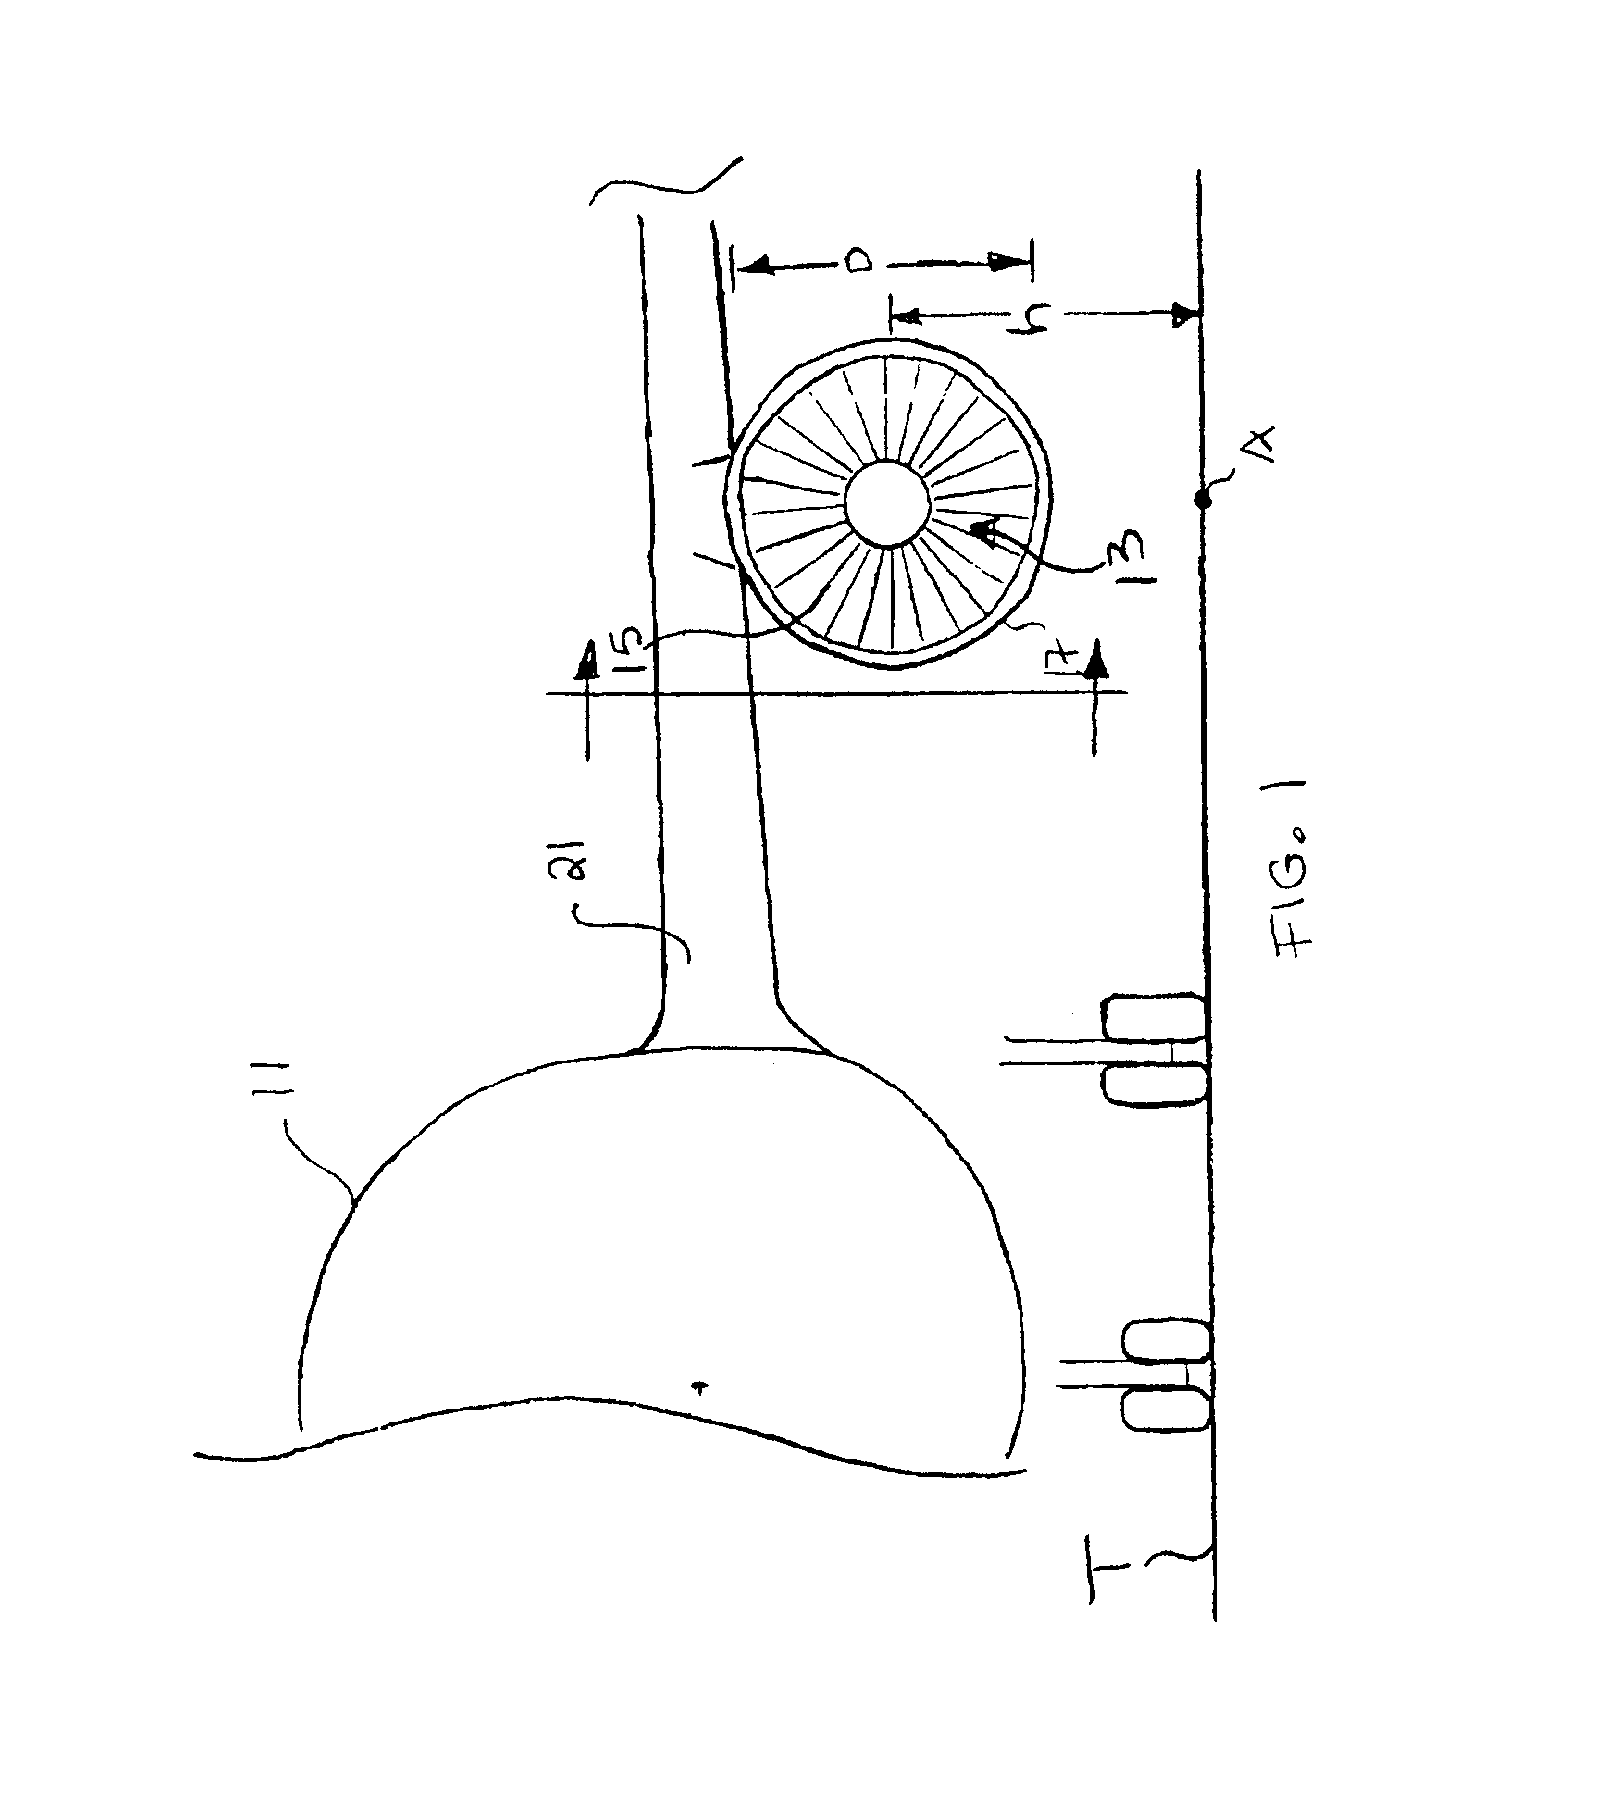 Apparatus and method for preventing inlet vortex